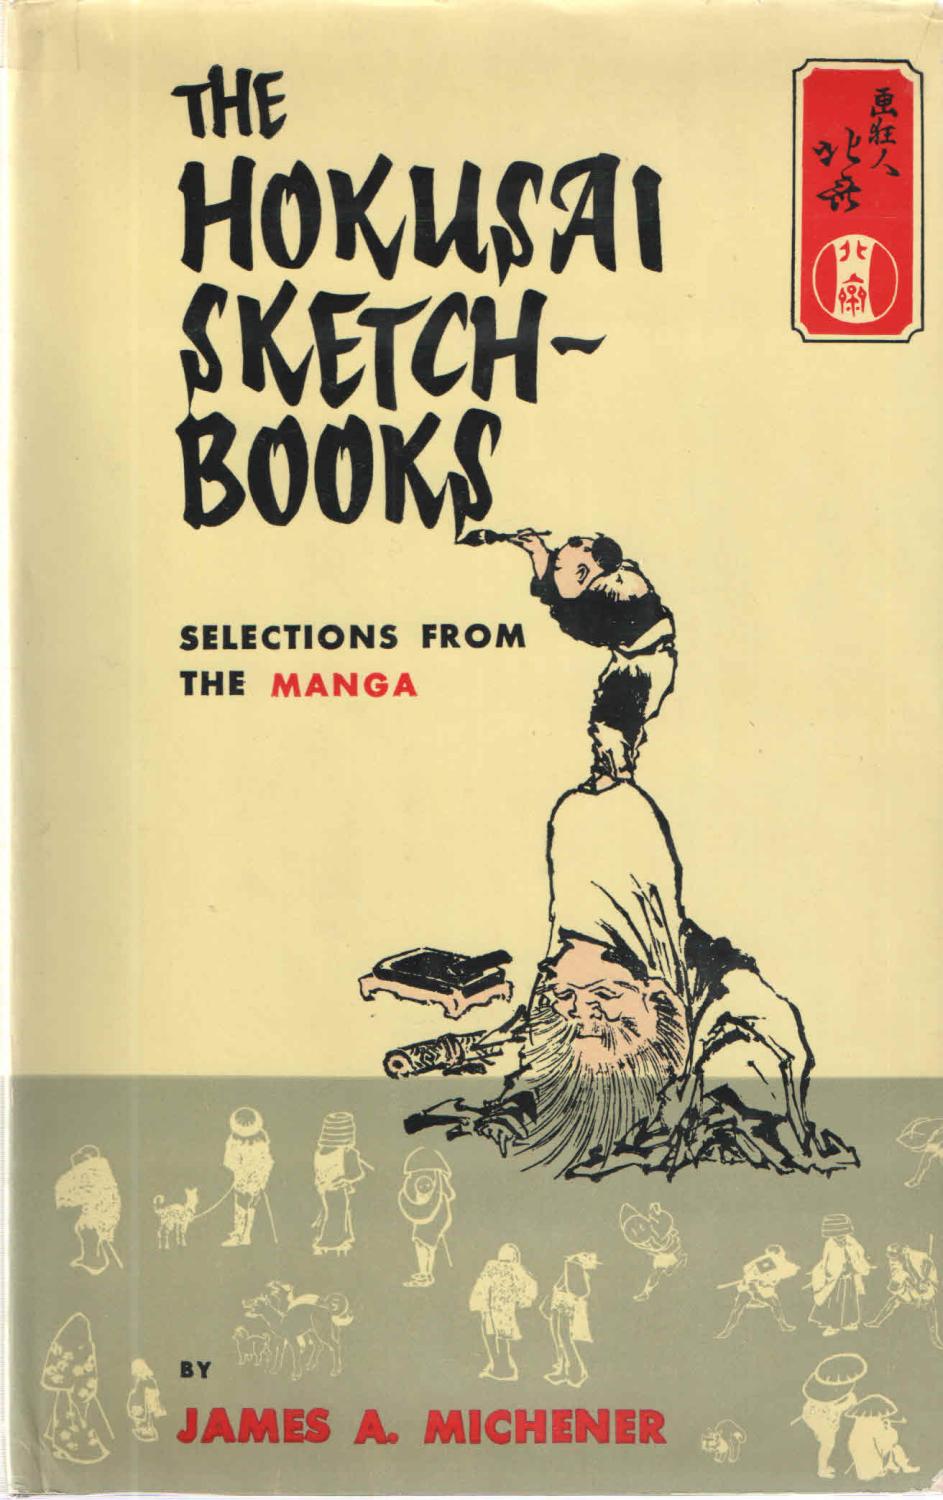 The Hokusai Sketch-Books : Selections from the Manga